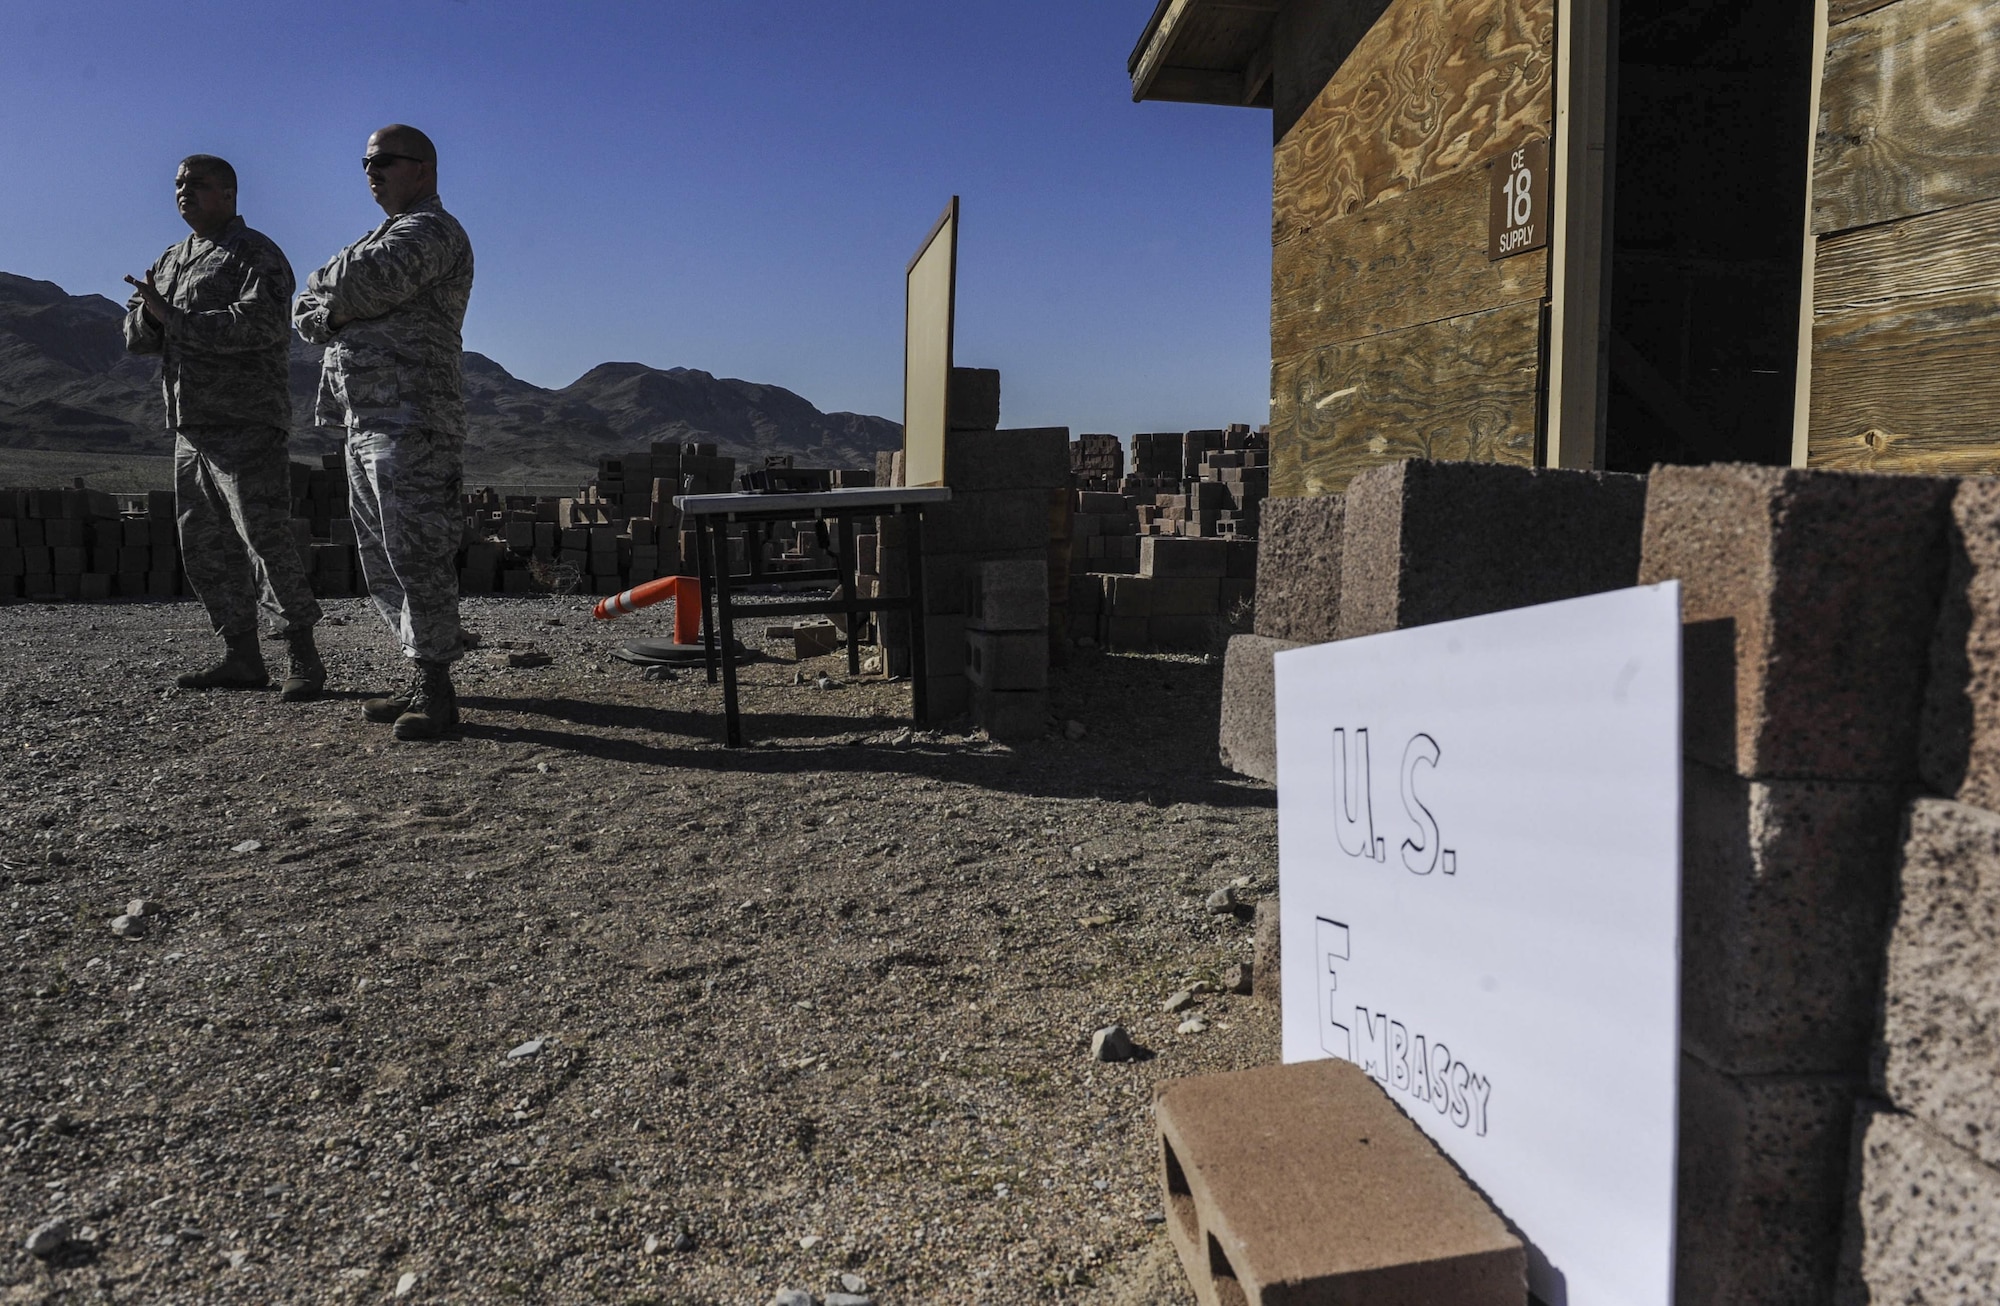 Senior leadership waits outside a simulated U.S. Embassy for Airmen from multiple teams to speak with simulated vendors during a 99th Contracting Squadron training exercise on Nellis Air Force Base, Nev., March 16, 2017. The 99th CONS coordinated and hosted this exercise, bringing contracting personnel from five separate bases to participate. (U.S. Air Force photo by Airman 1st Class Kevin Tanenbaum/Released)